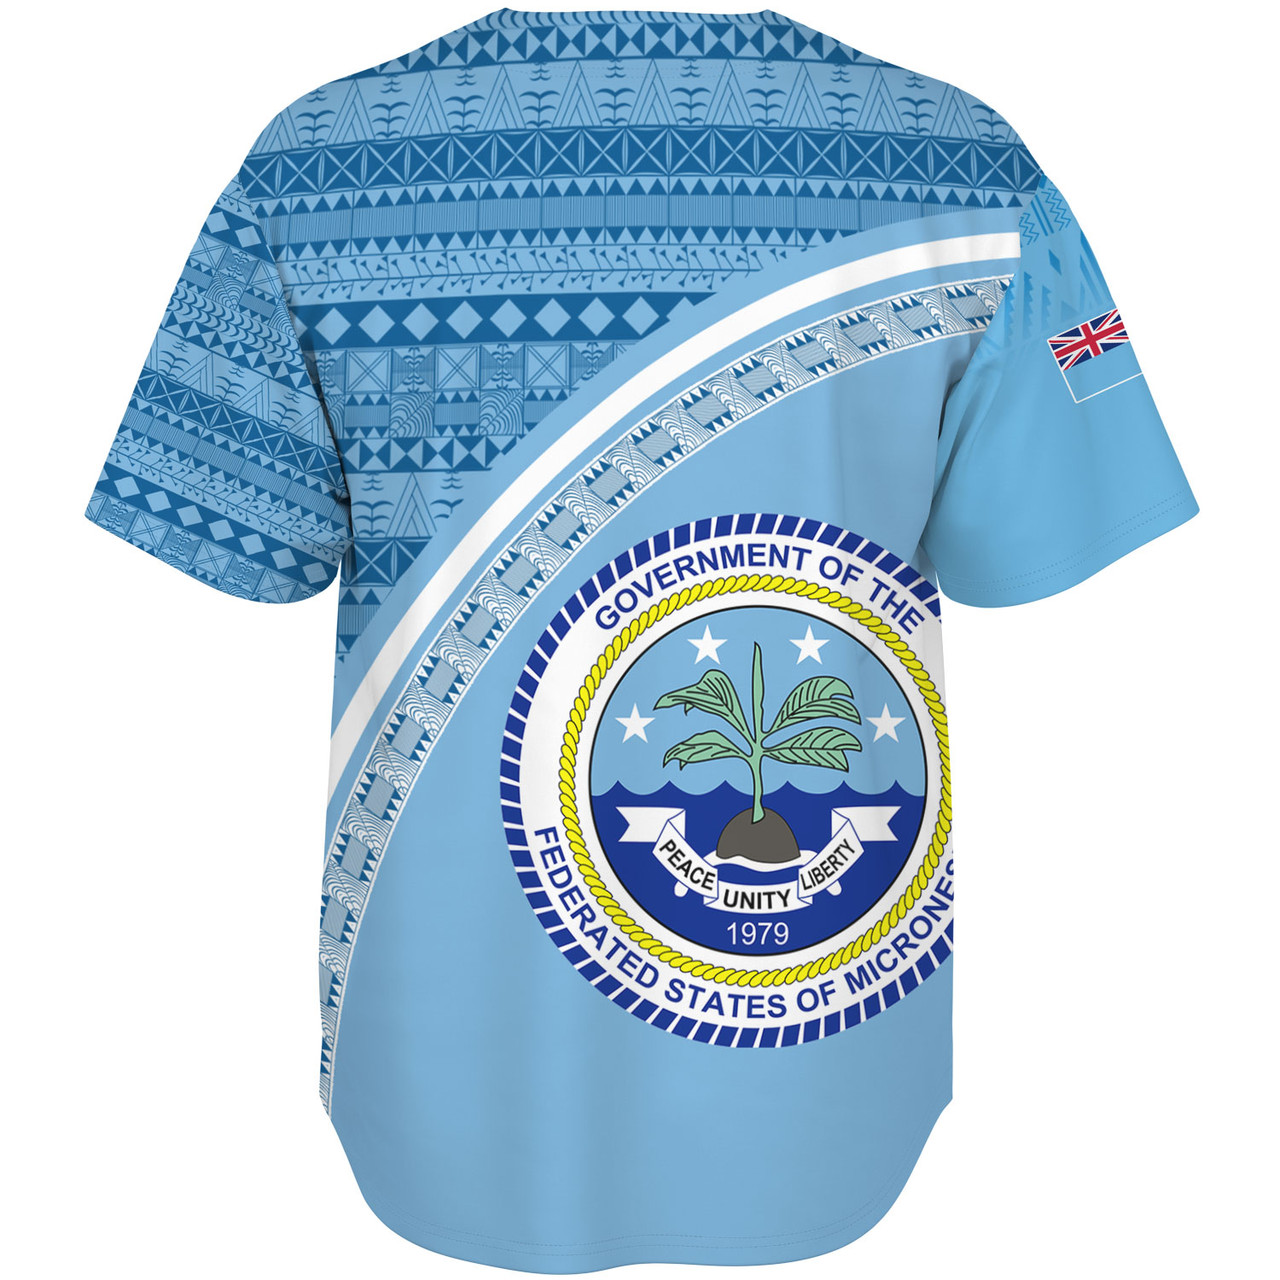 Federated States Of Micronesia Custom Personalised Baseball Shirt Micronesia Tribal Patterns Curve Style